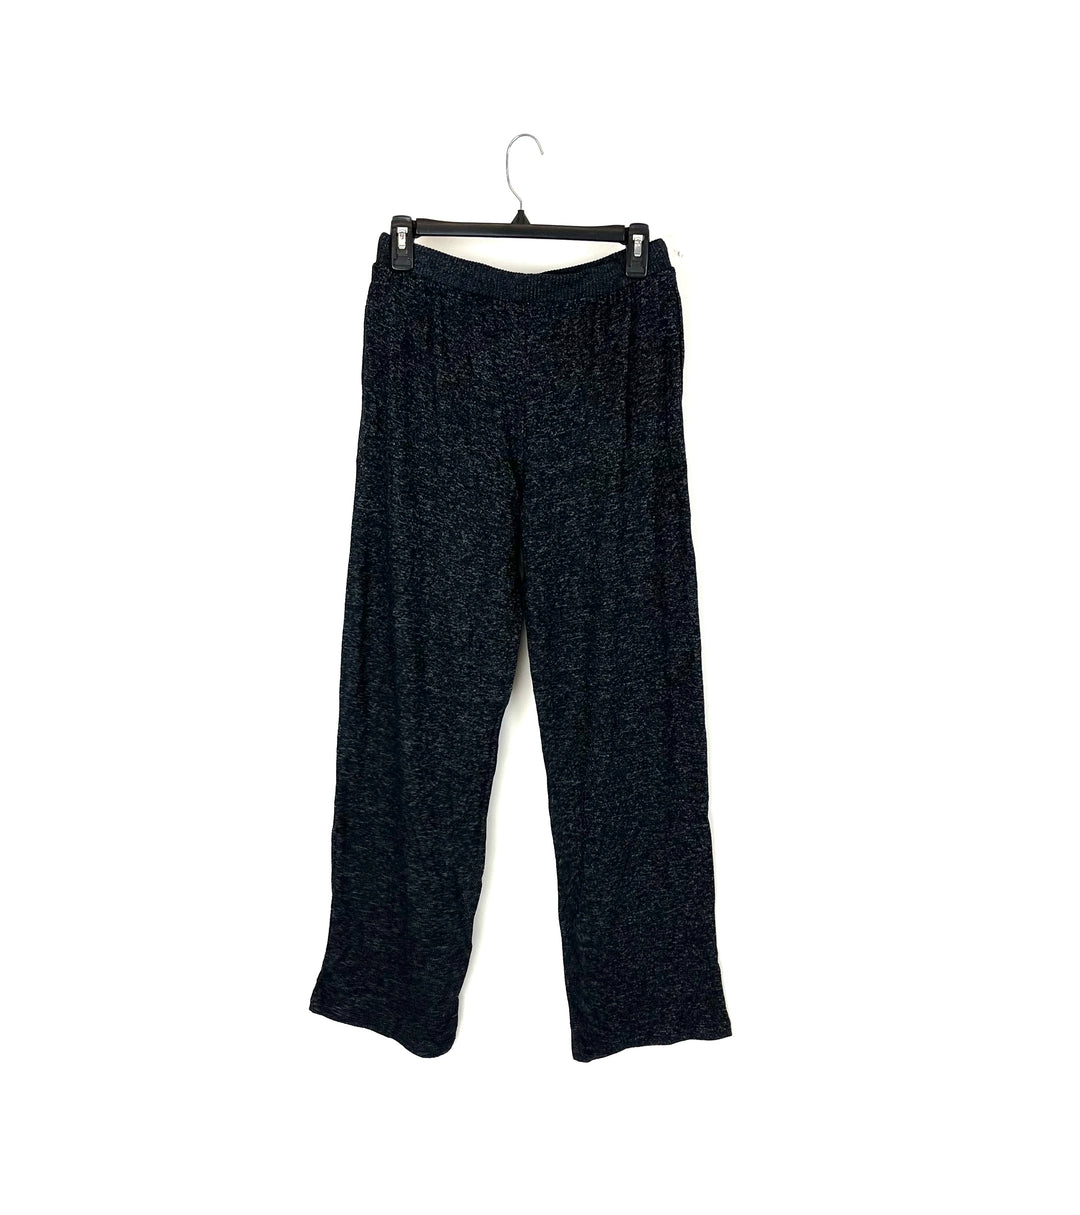 Black And Grey Knit Loungewear Bottoms - Small